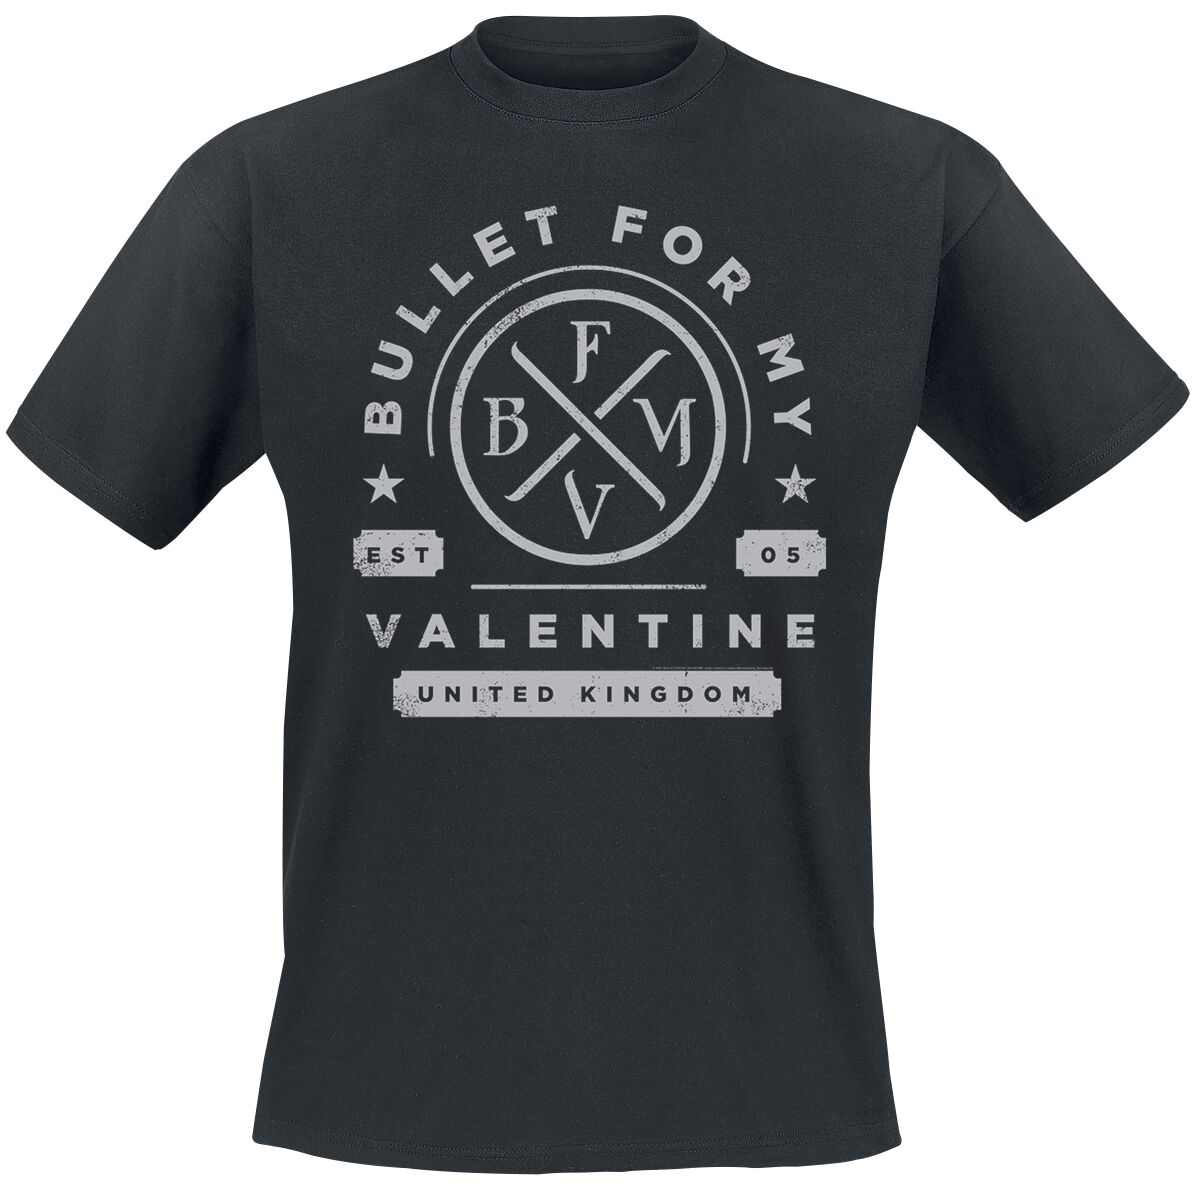 Image of Bullet For My Valentine Arched Text T-Shirt schwarz